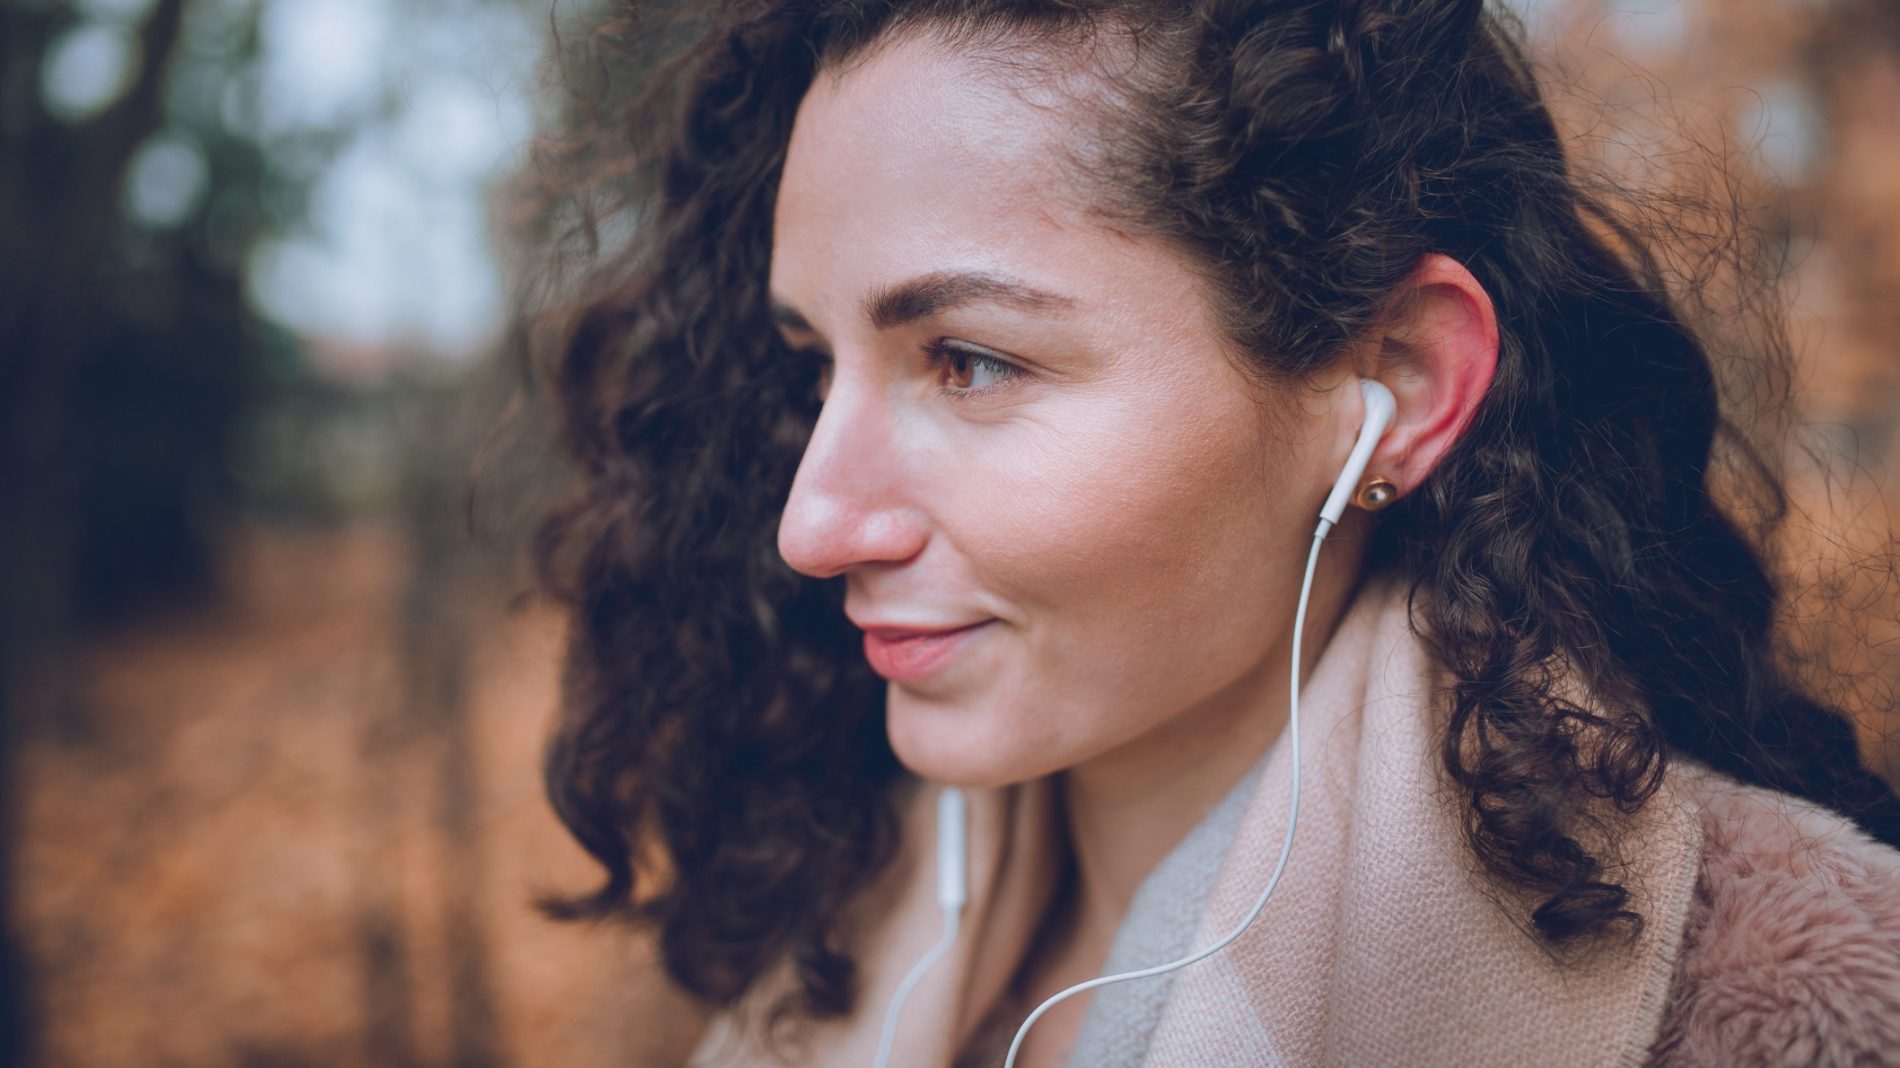 Young person practising self-care and listening to music